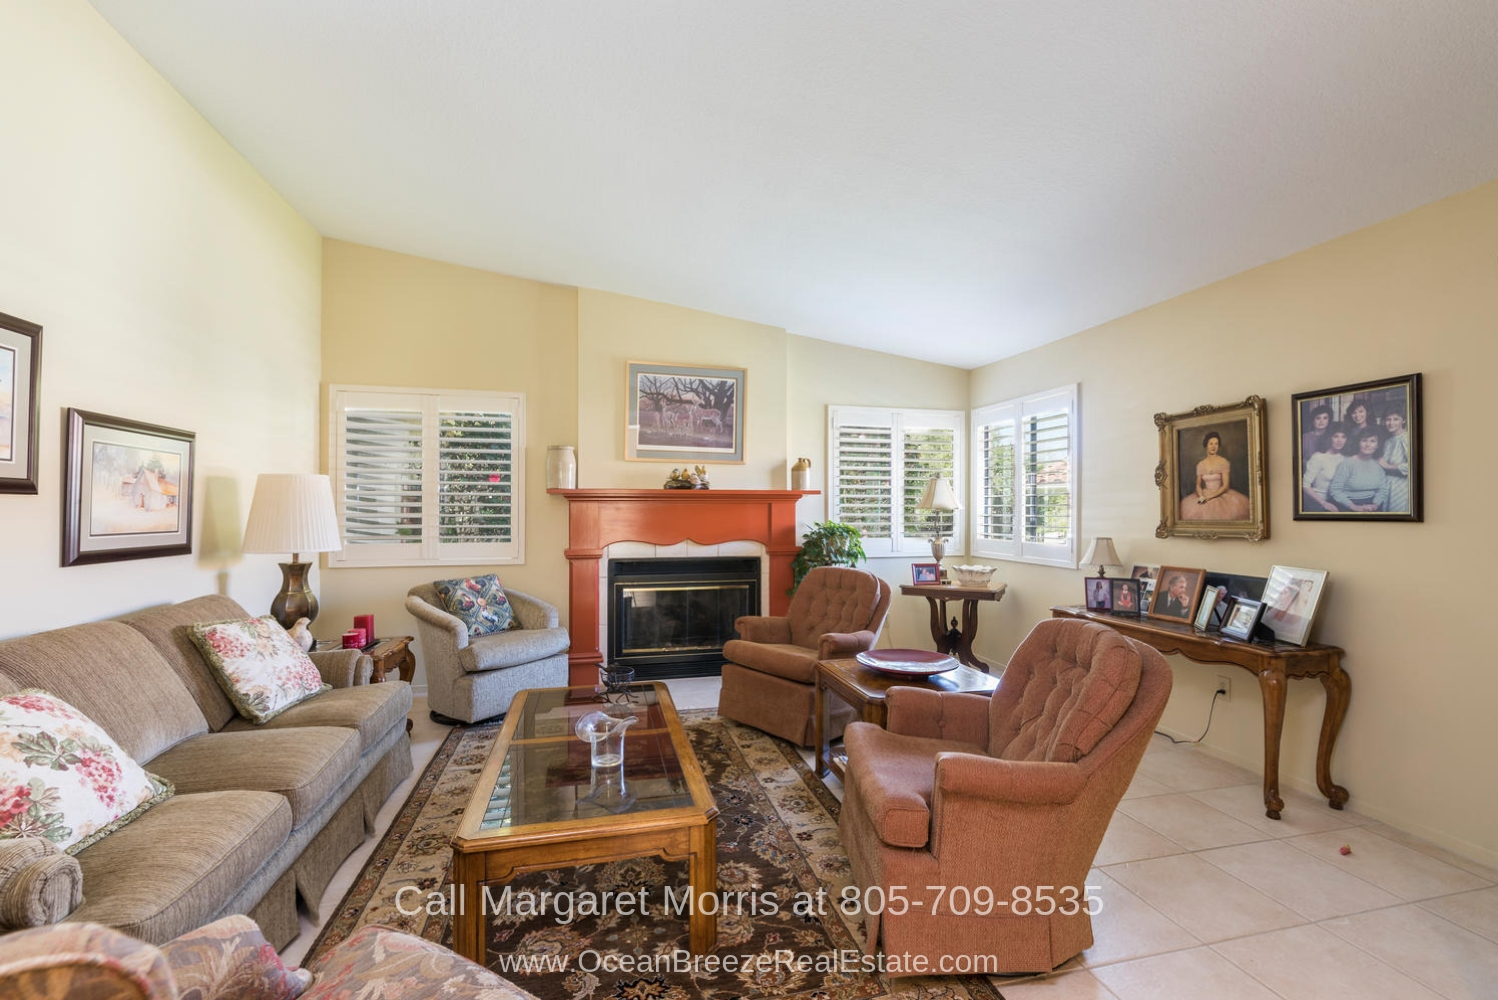 Nipomo CA Golf Homes - Ample space, lush foliage, and all the conveniences of modern living are yours in this beautiful Blacklake golf community home for sale. 